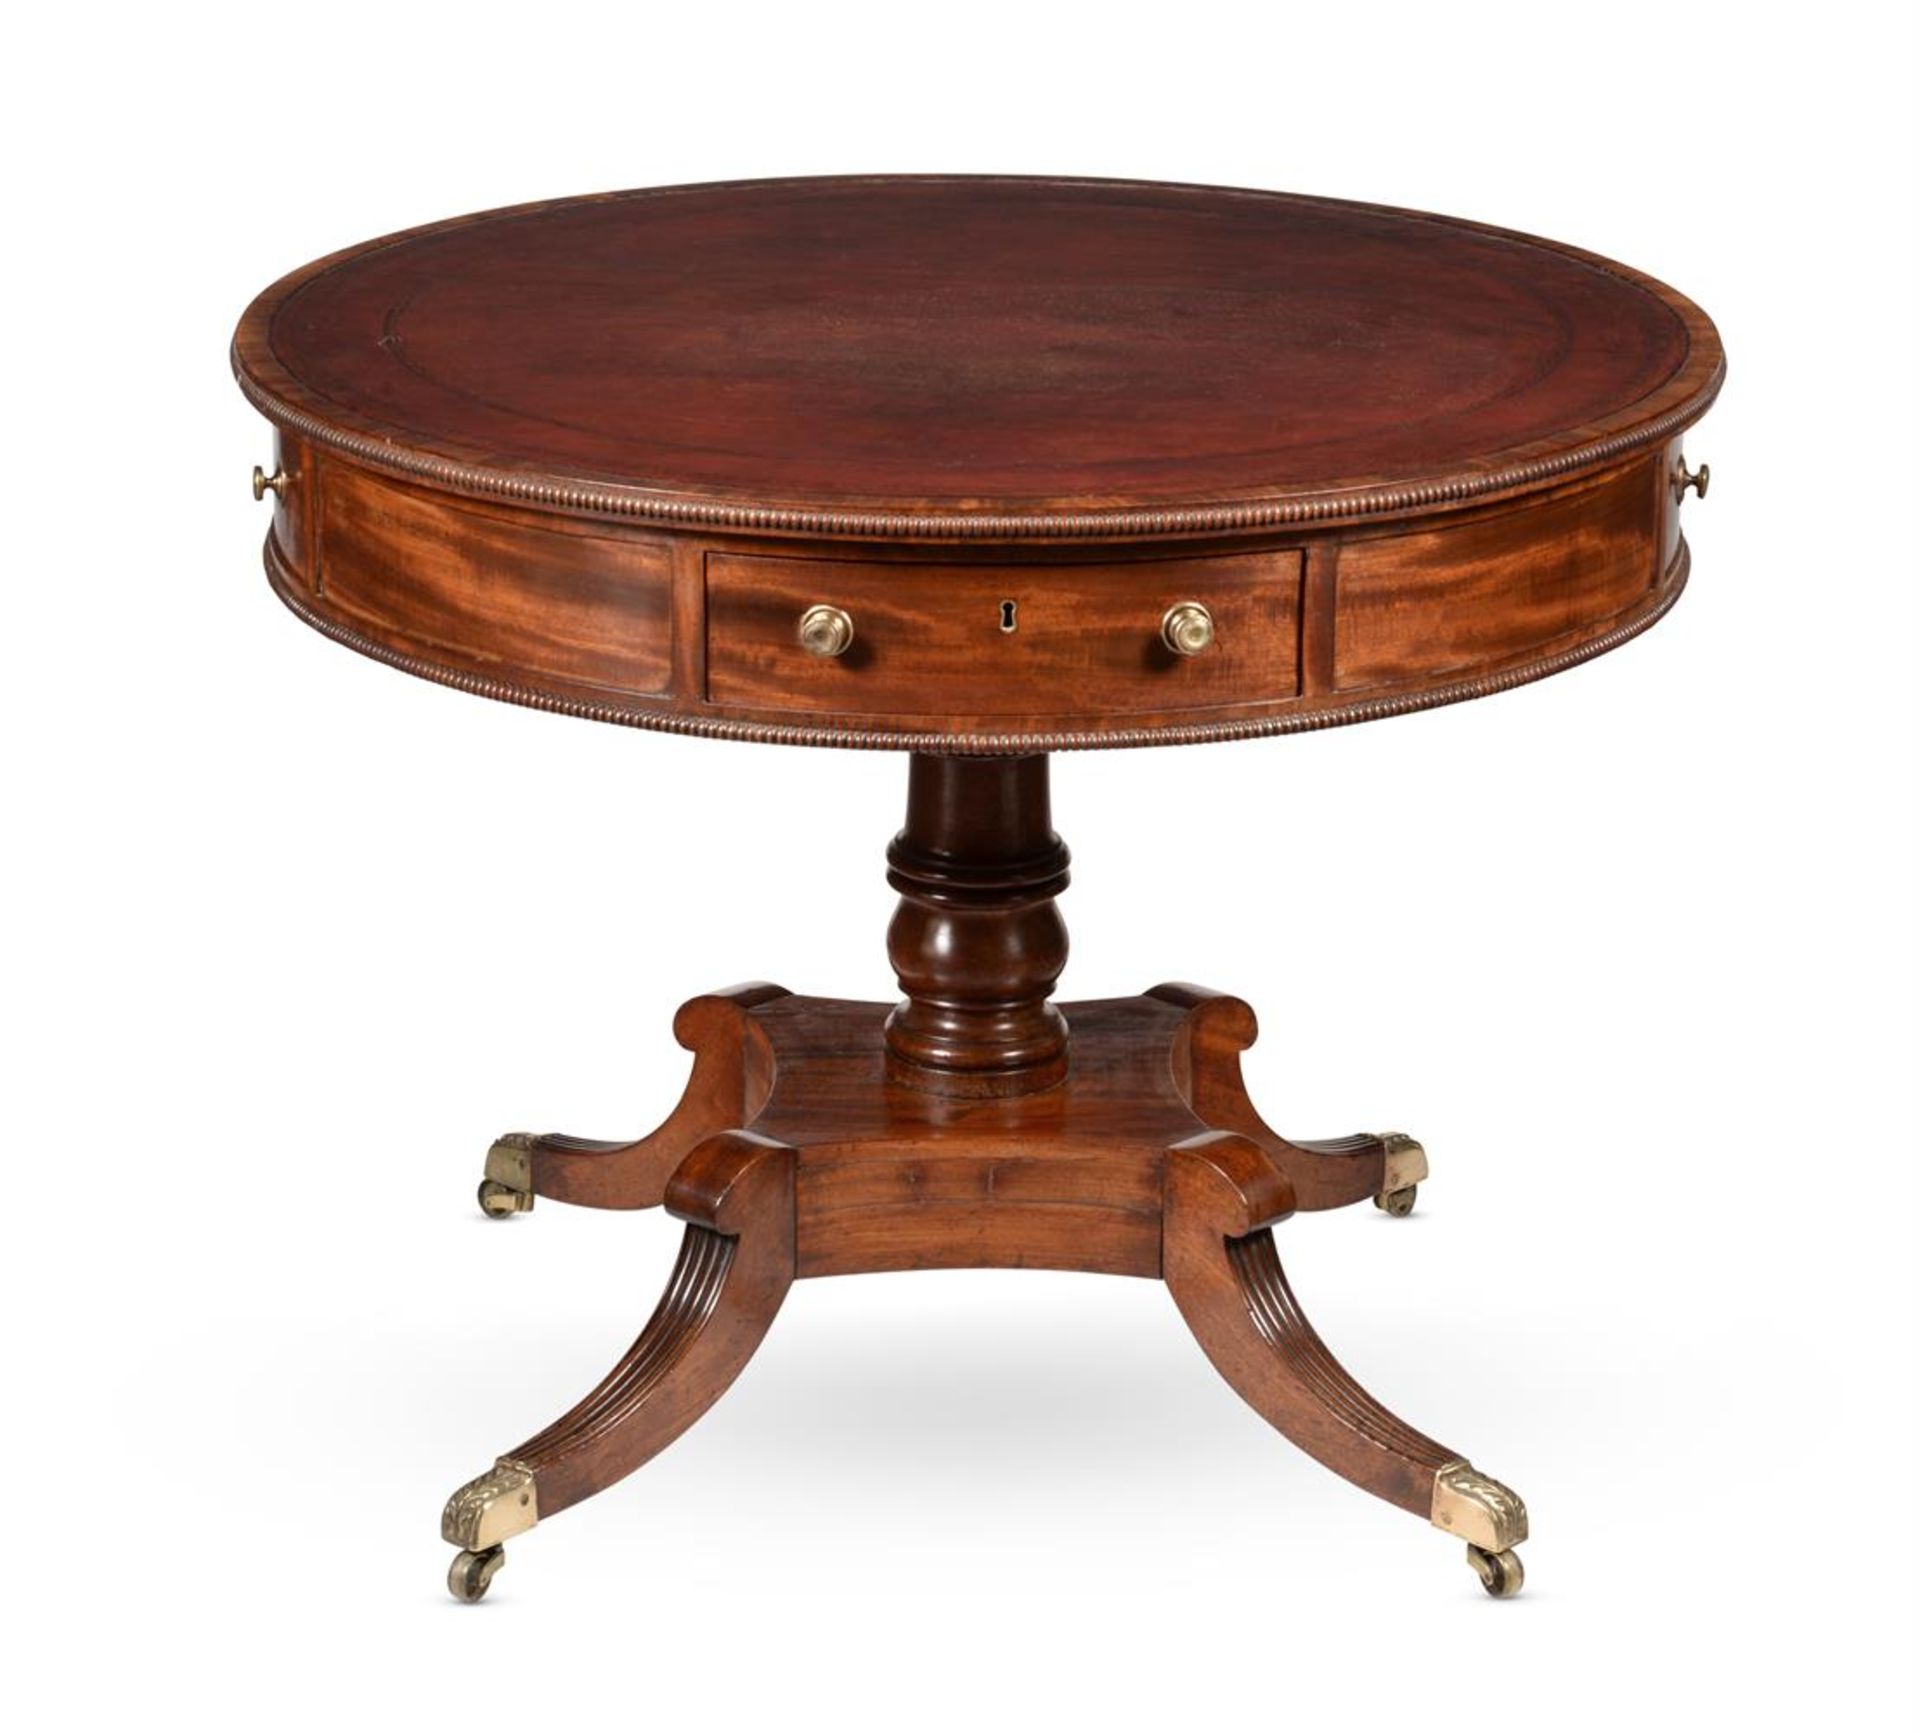 A REGENCY MAHOGANY DRUM LIBRARY TABLE, ATTRIBUTED TO GILLOWS, CIRCA 1815